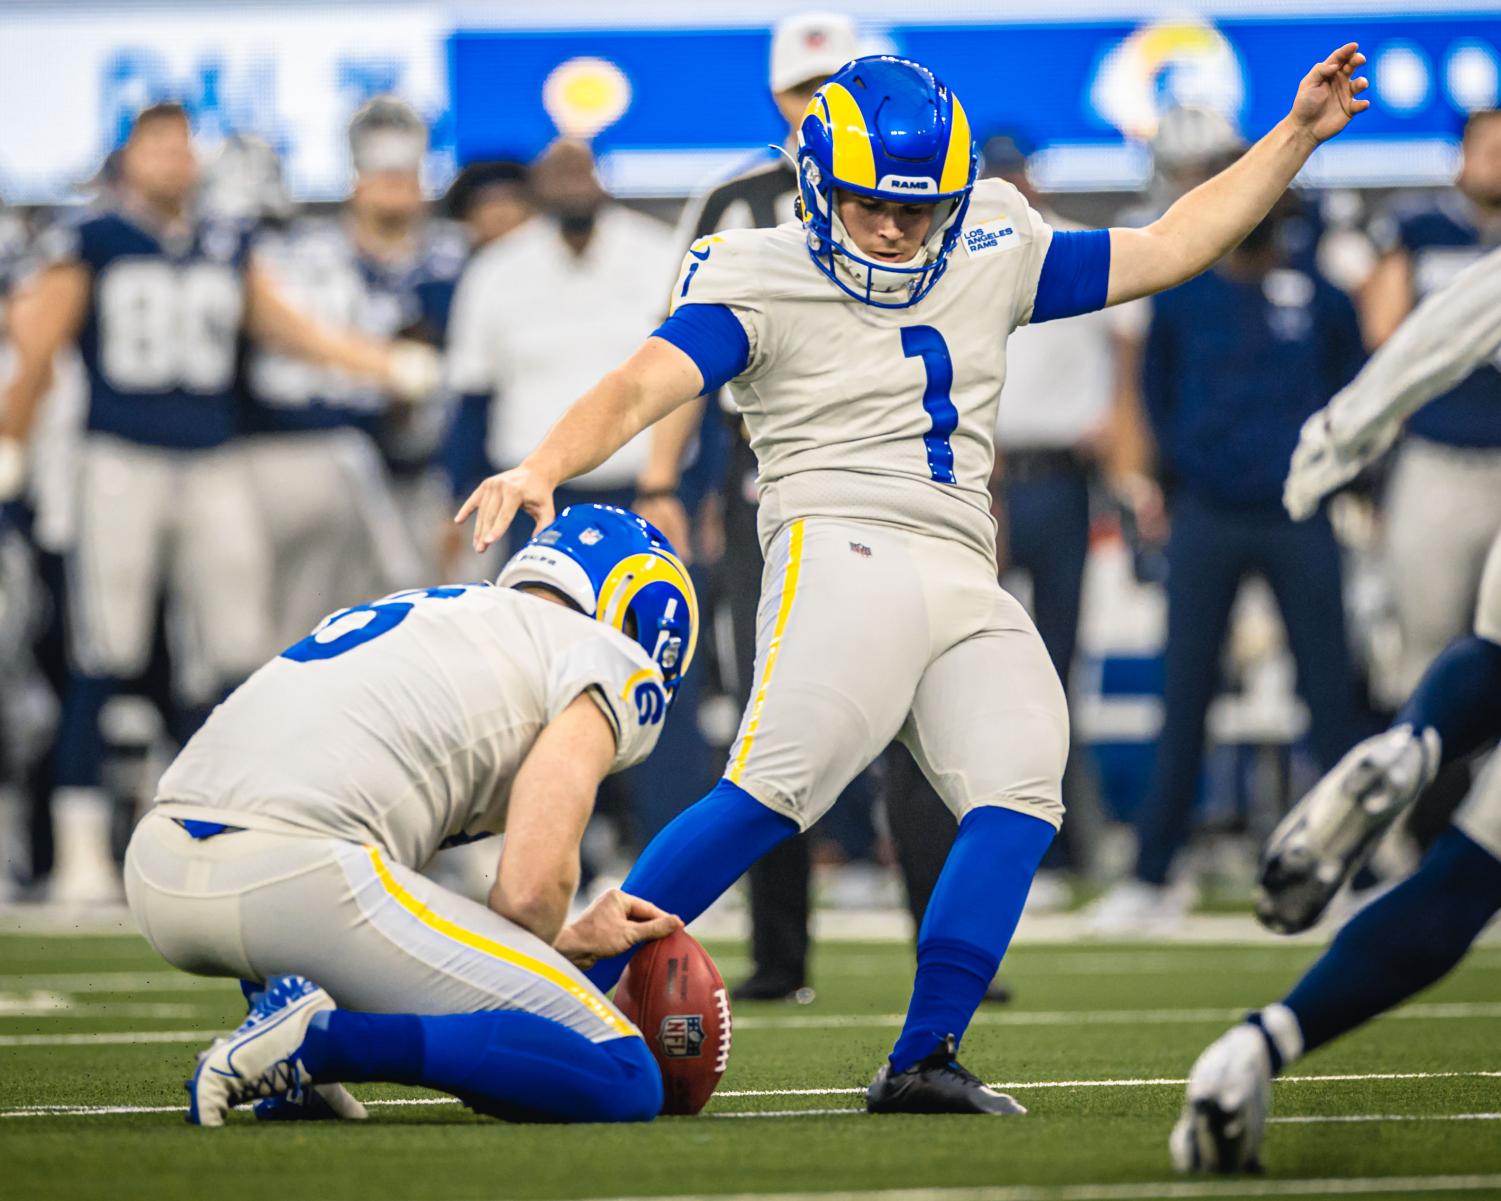 Sloman went two for three, kicking field goals for the Los Angeles Rams win over the Dallas Cowboys